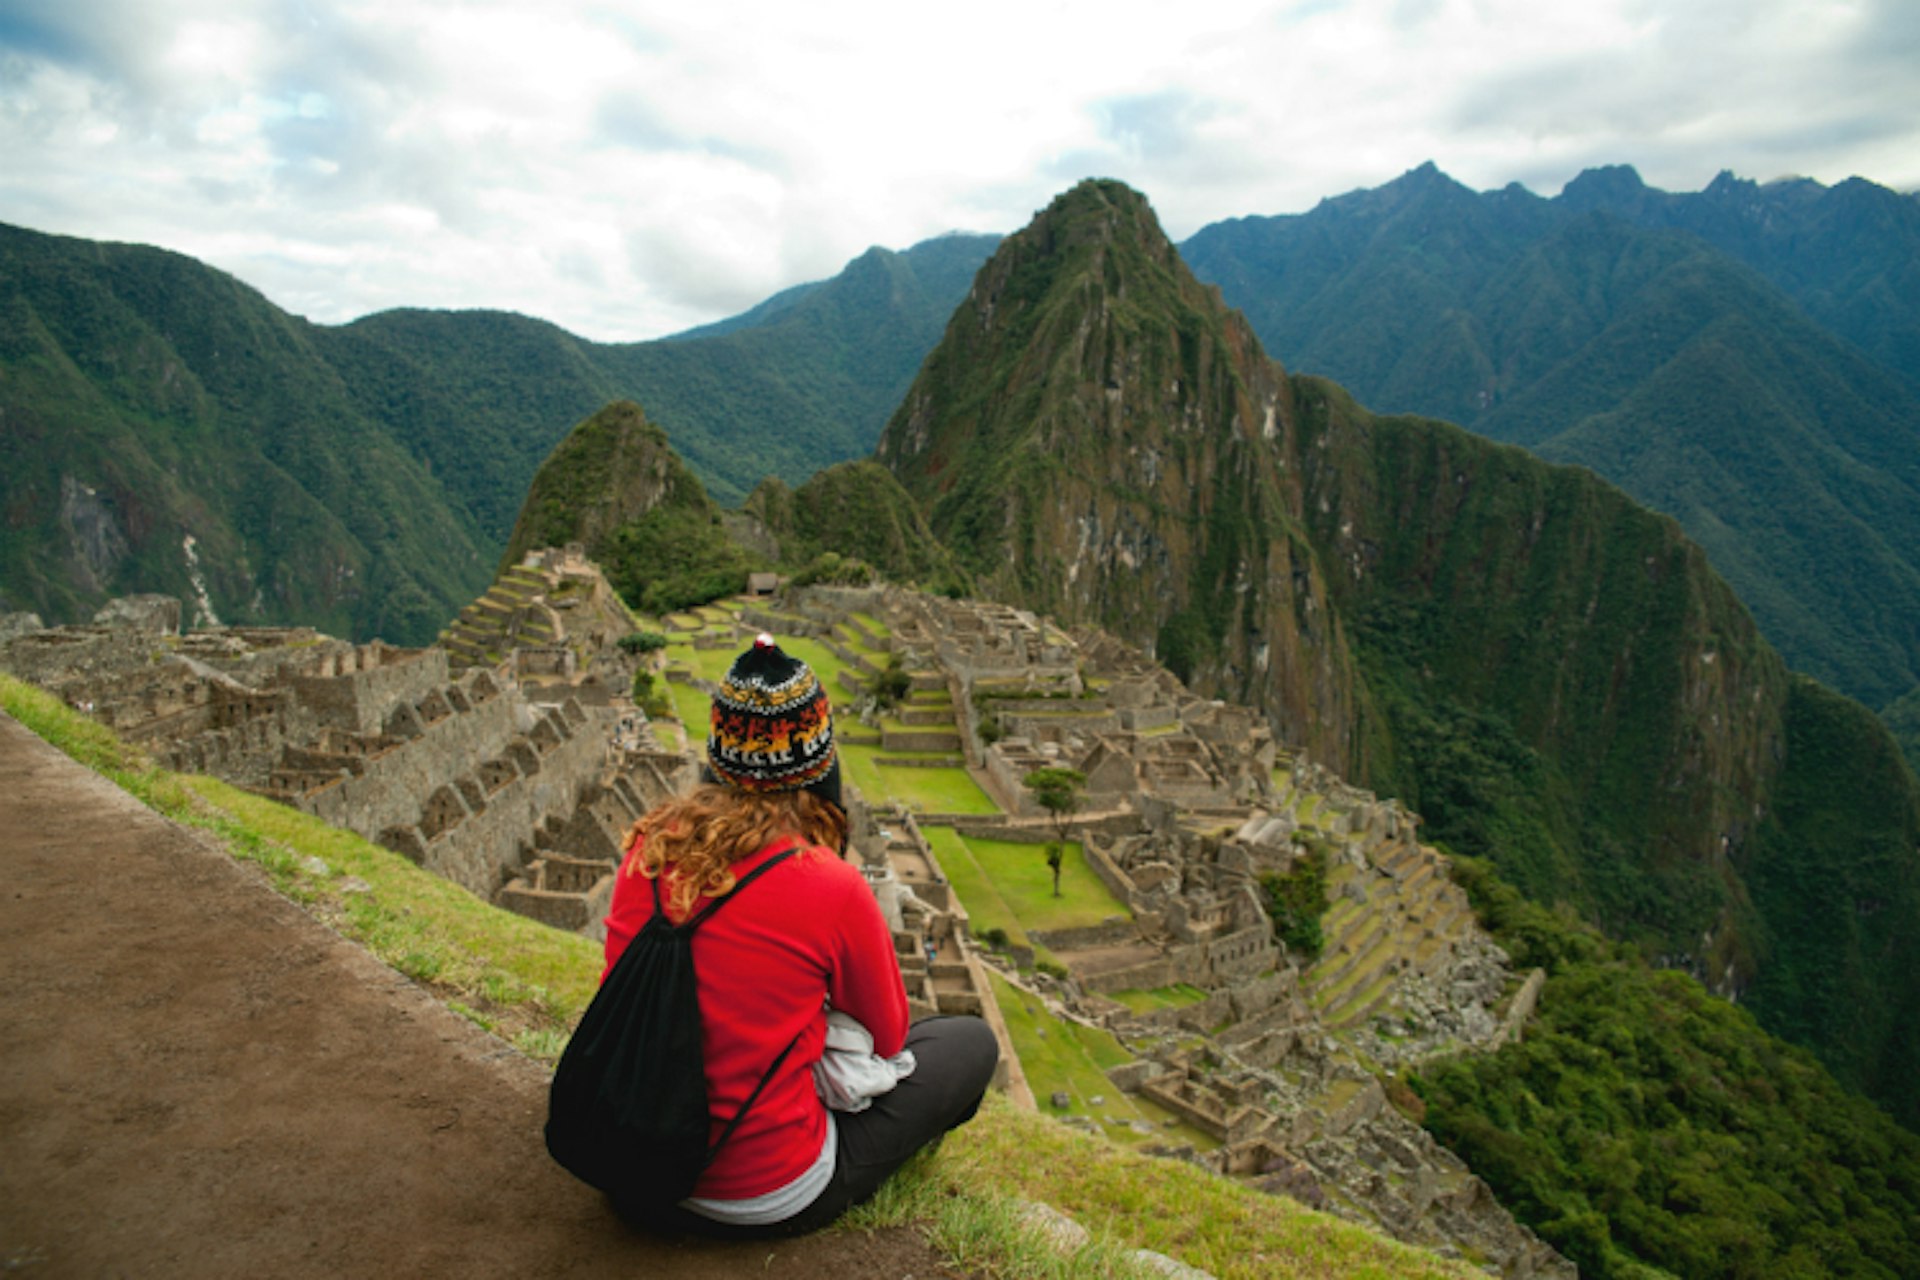 Peru's magical Machu Picchu, a fixture on many a bucket list. Image by Mikel Oibar / Nervio Foto / Moment / Getty Images